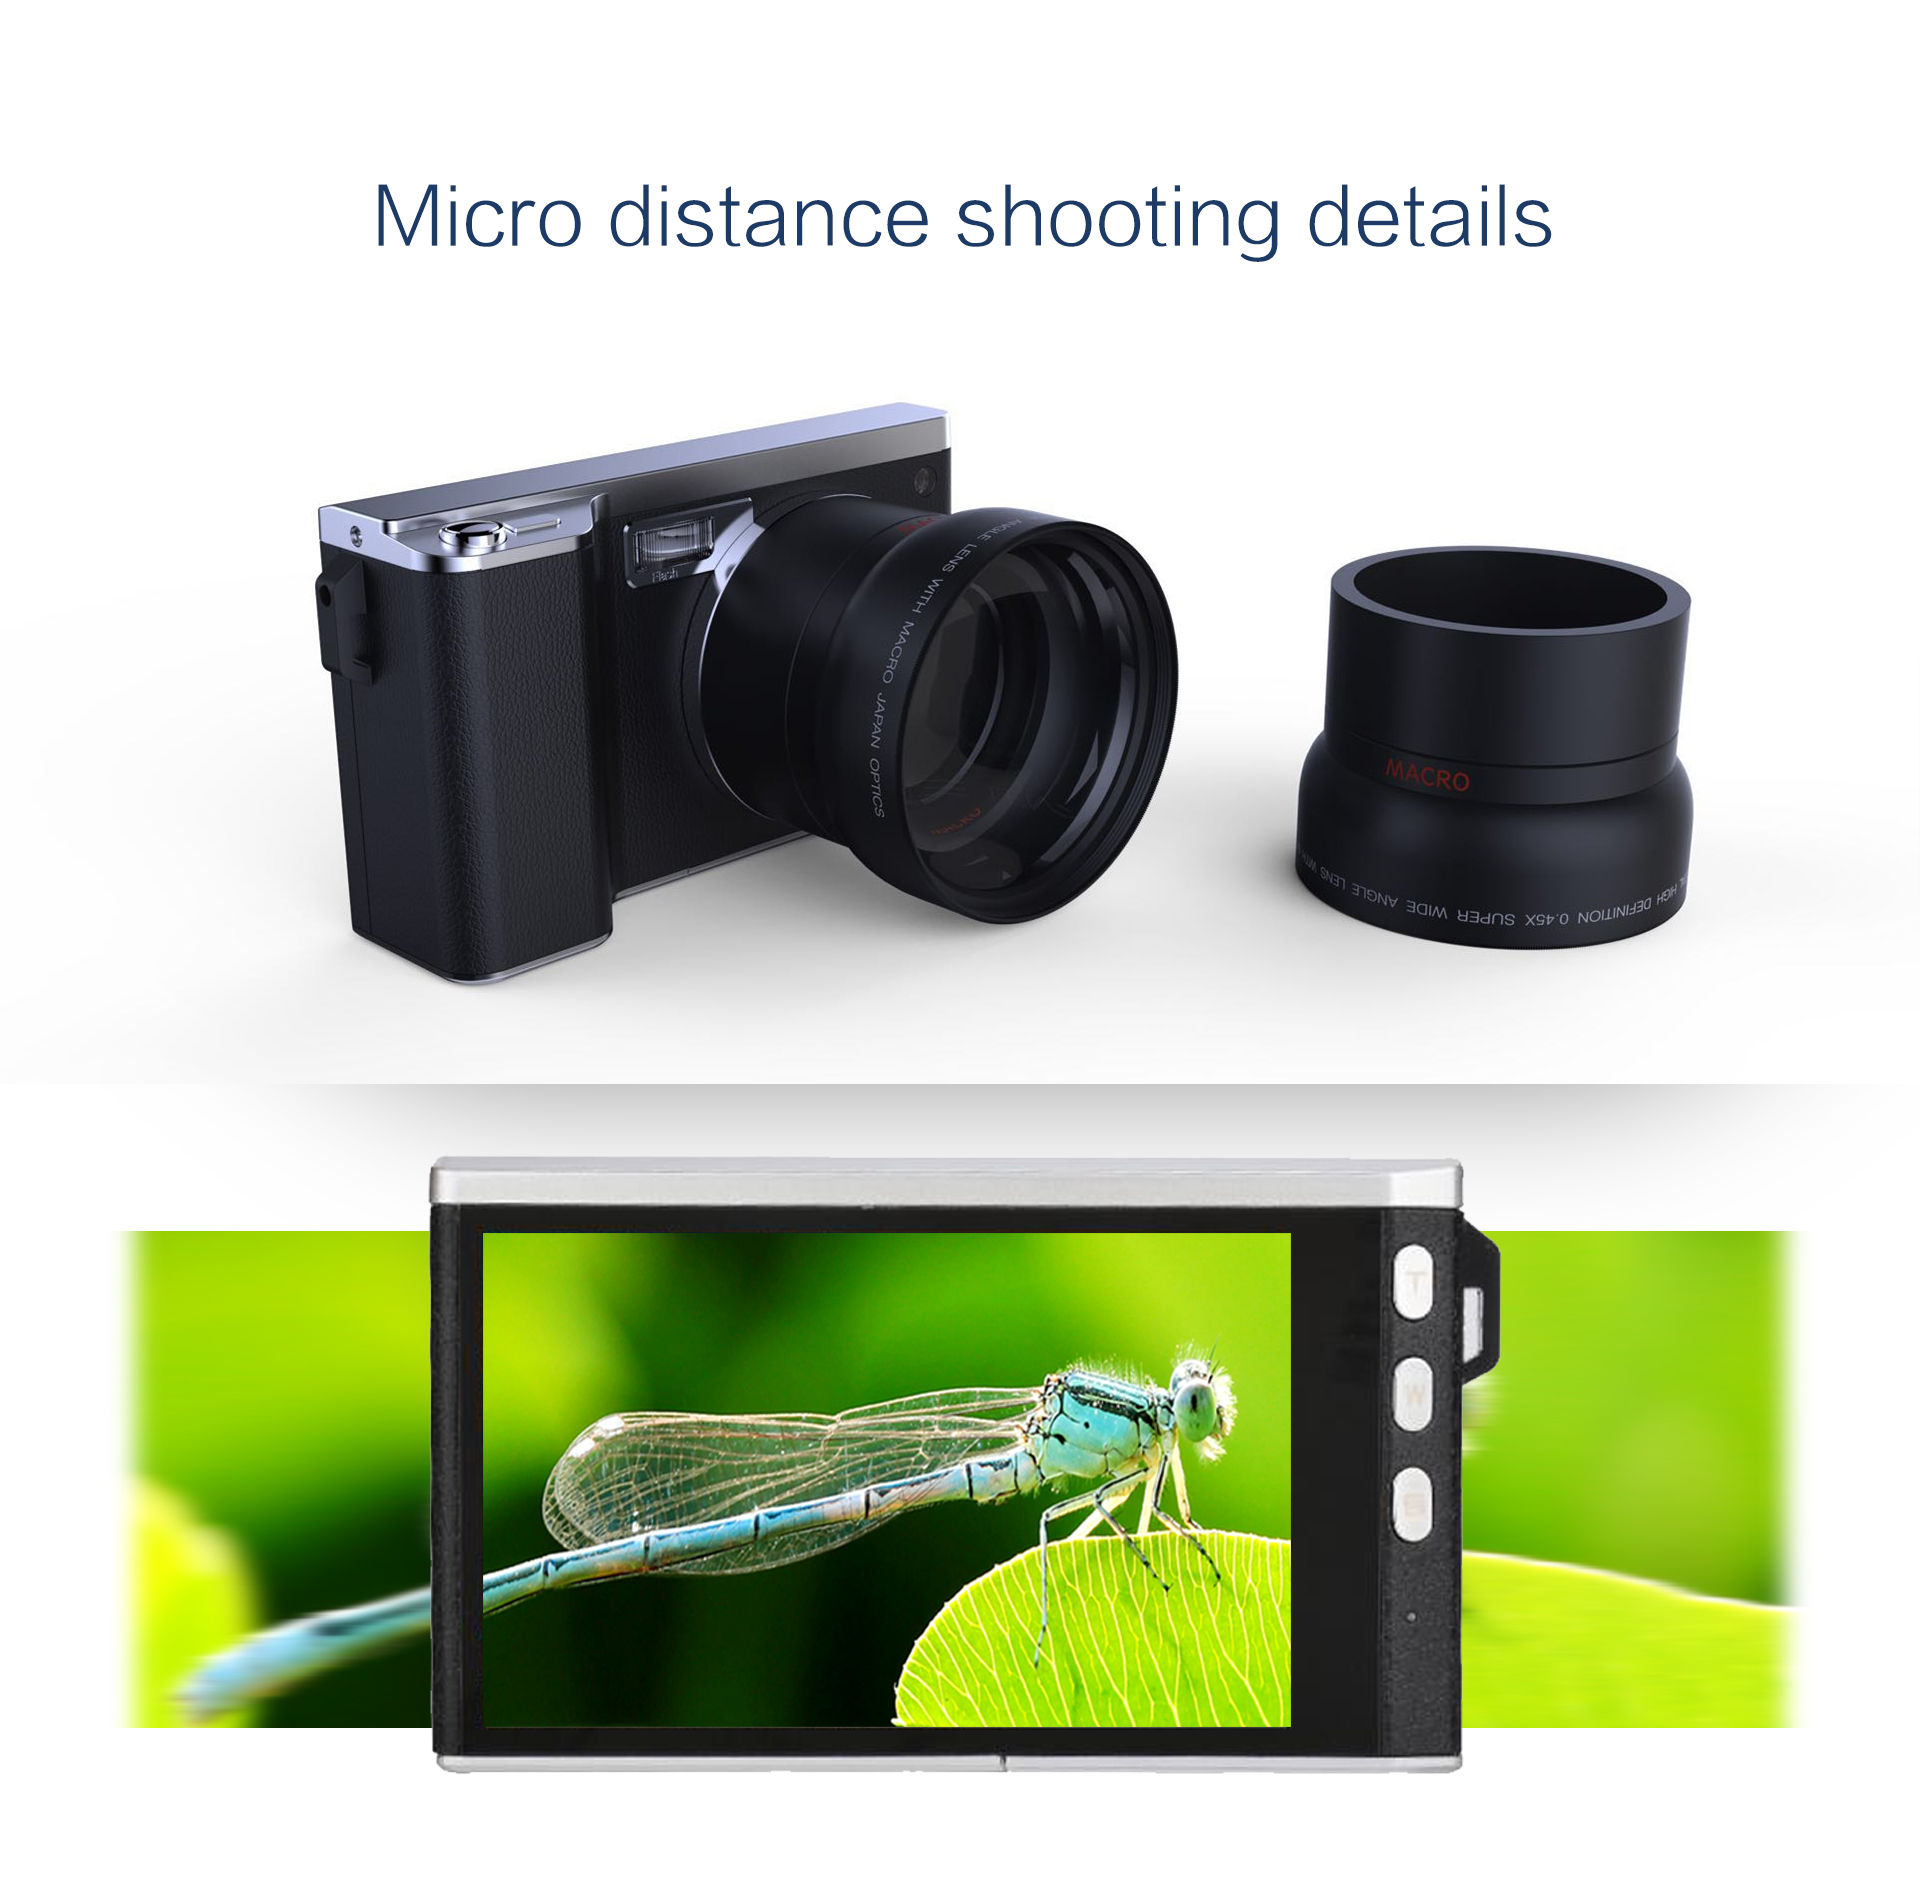 24MP-12X-Optical-Zoom-Anti-Shake-4-Inch-Touch-Screen-Digital-SLR-Camera-with-Wide-Angle-Lens-1466235